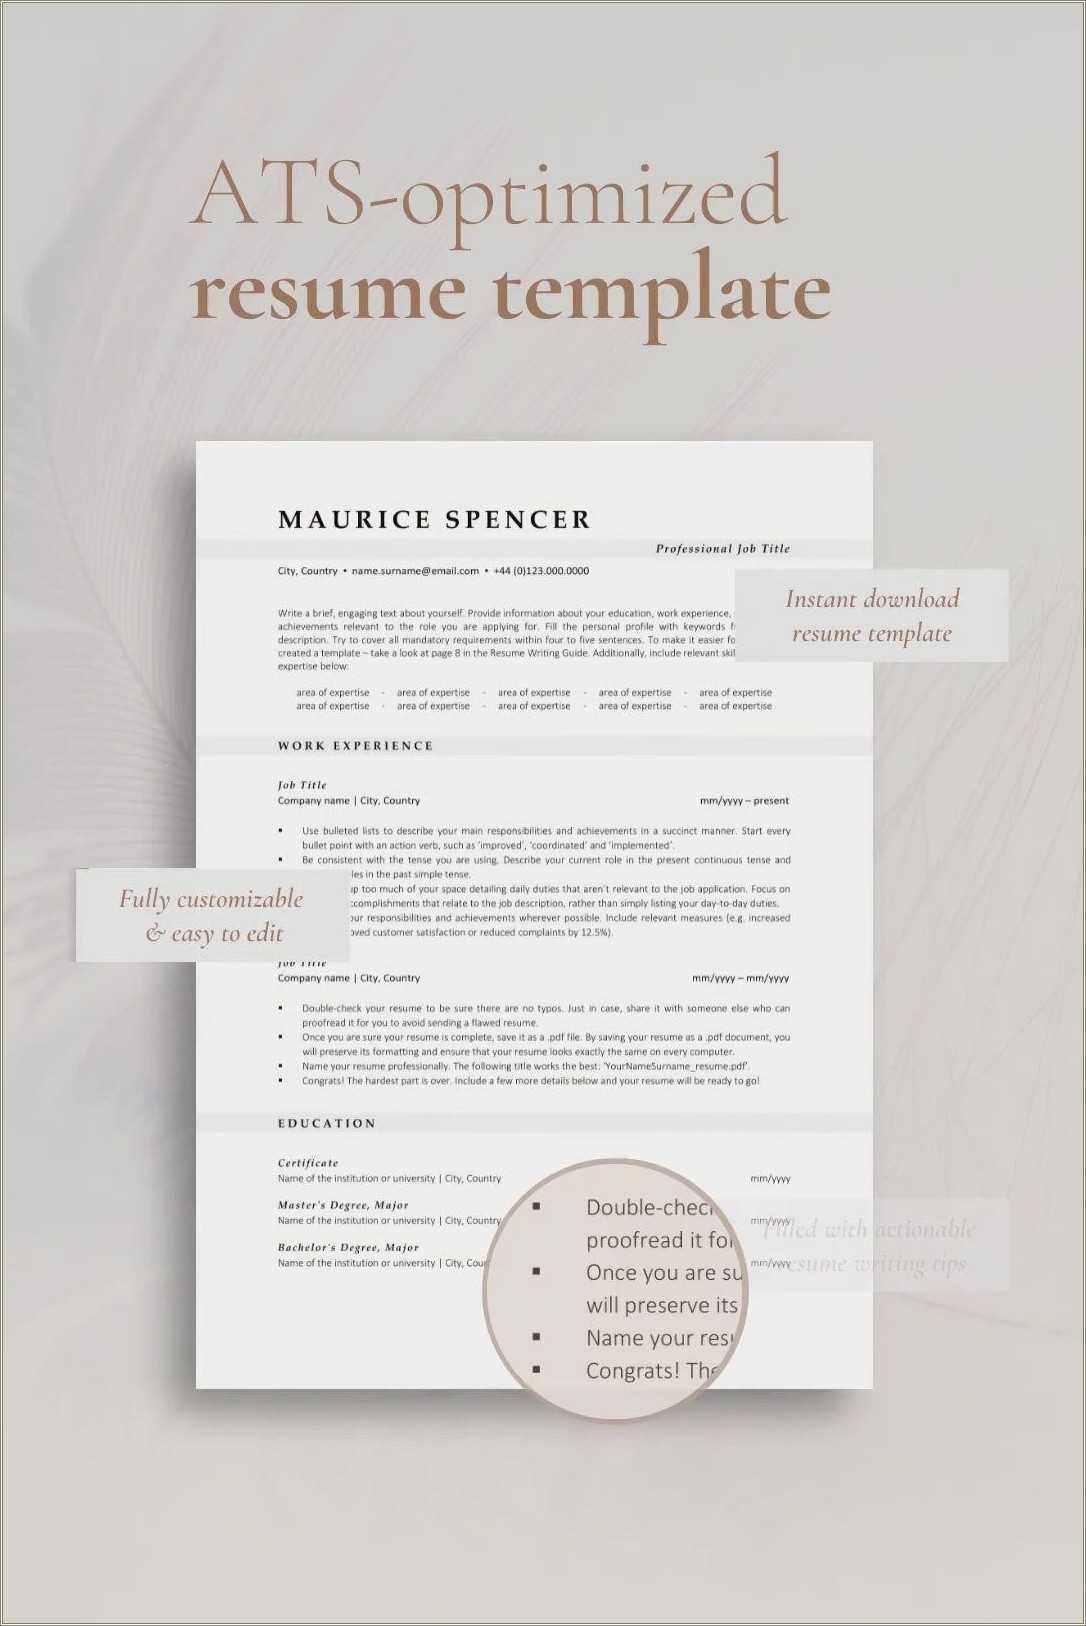 Best Canva Resume Templates Ats Resume Example Gallery